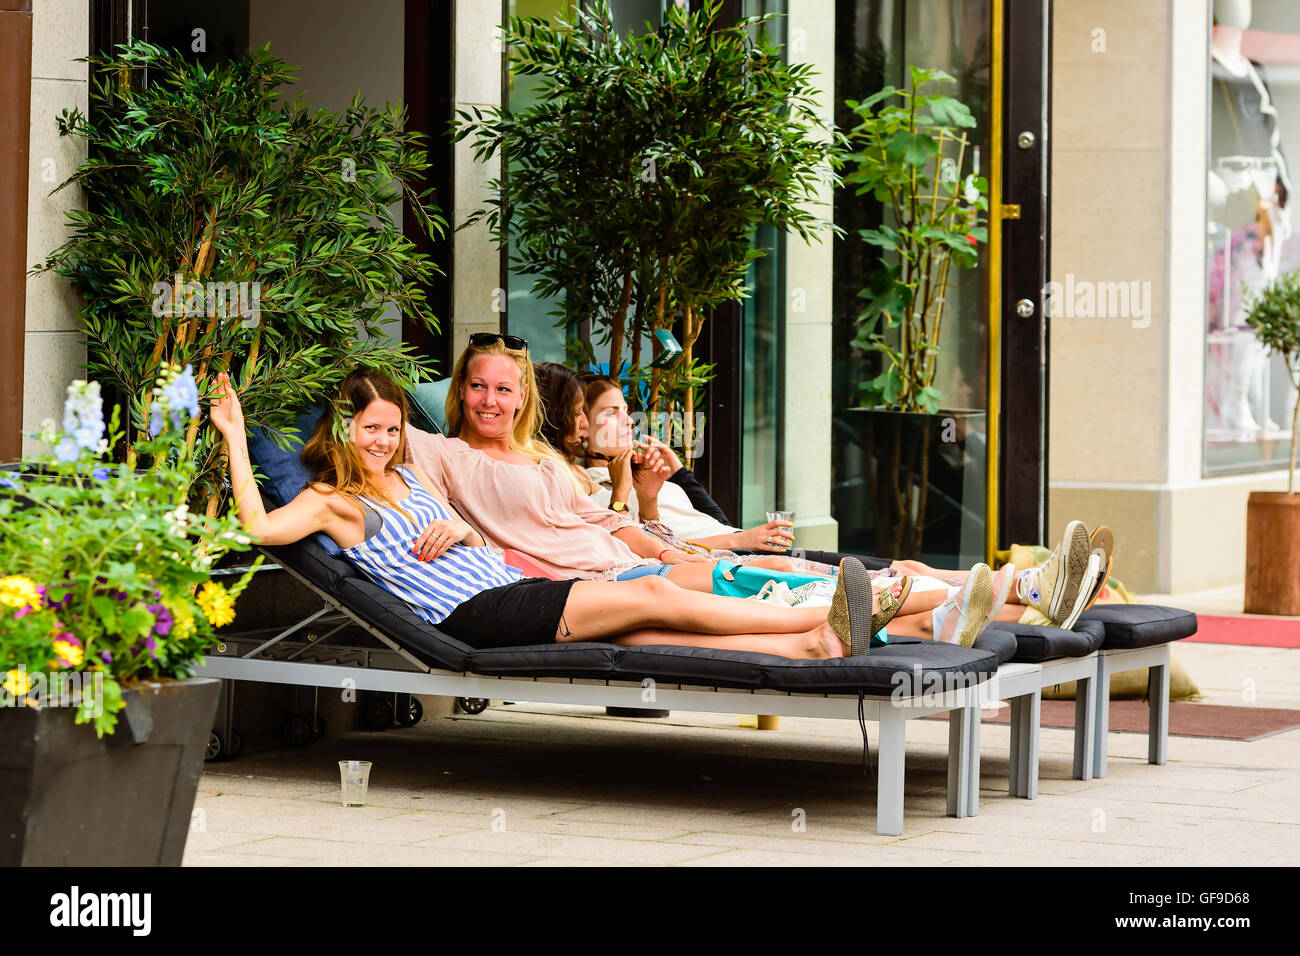 Goteborg, Sweden - July 25, 2016: Real people in everyday life. Four lovely young women lie down outside a coffee shop with smil Stock Photo